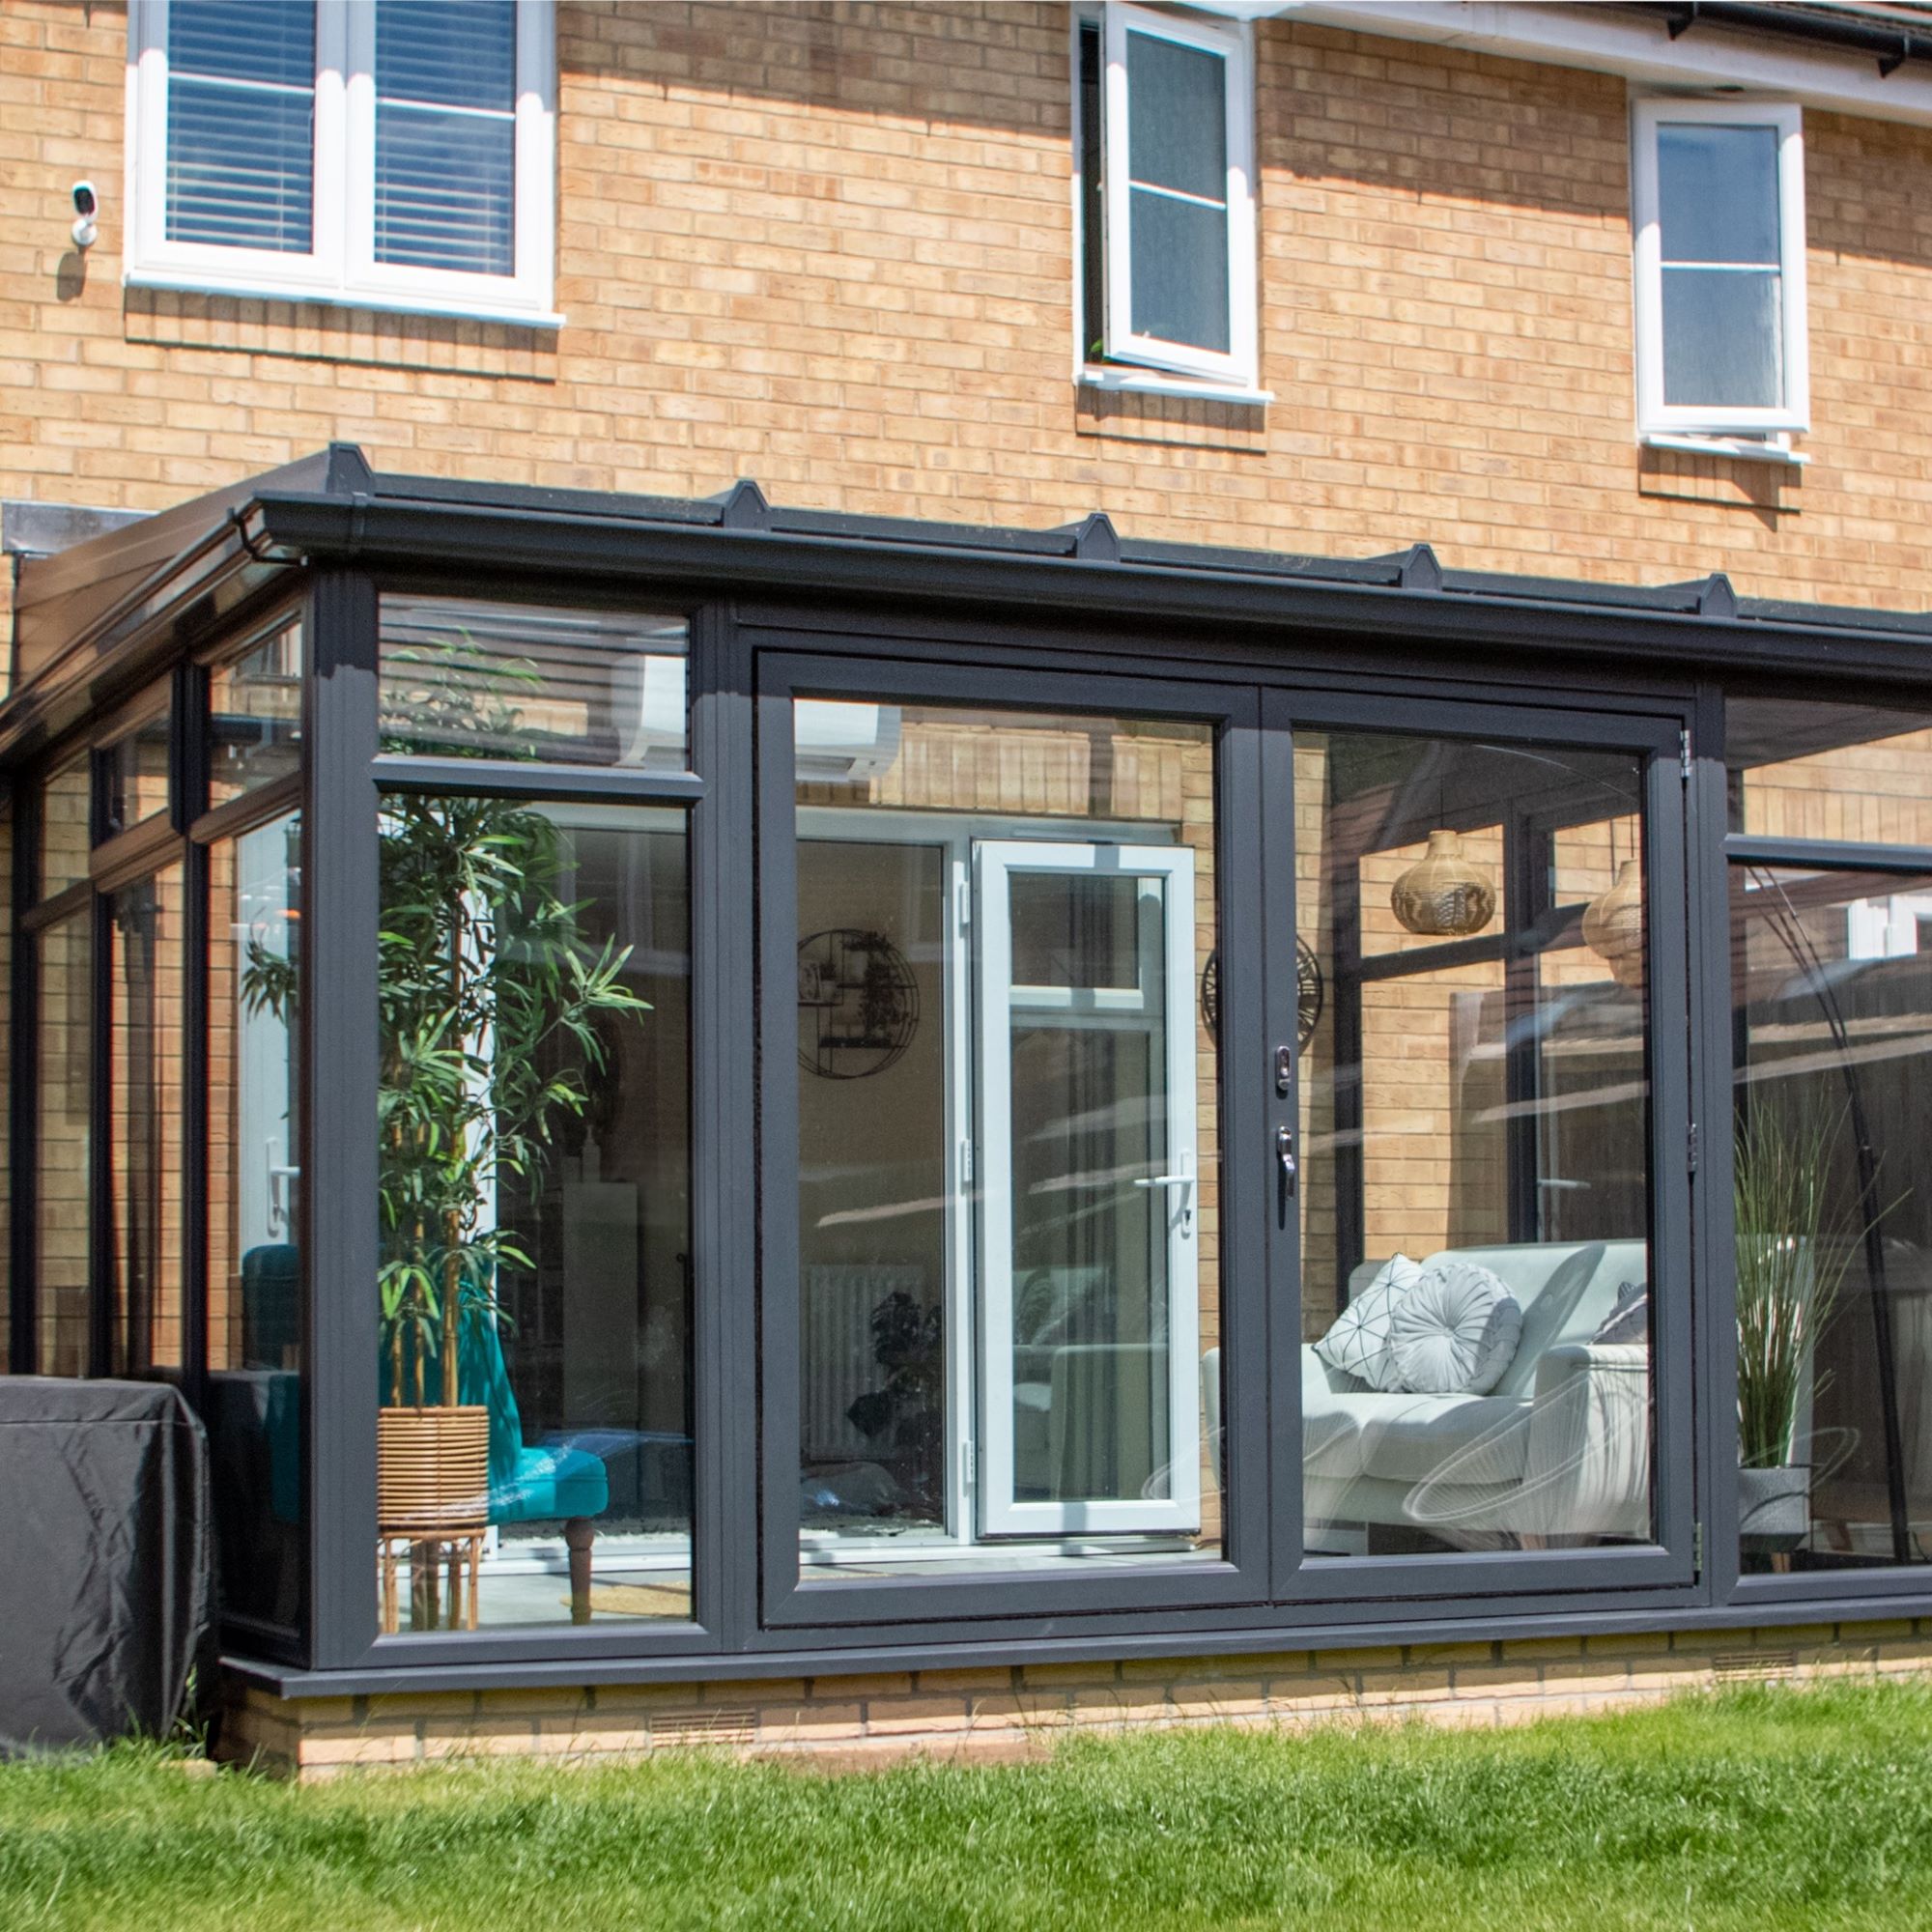 Conservatory on rear of house with glass panels and black frame